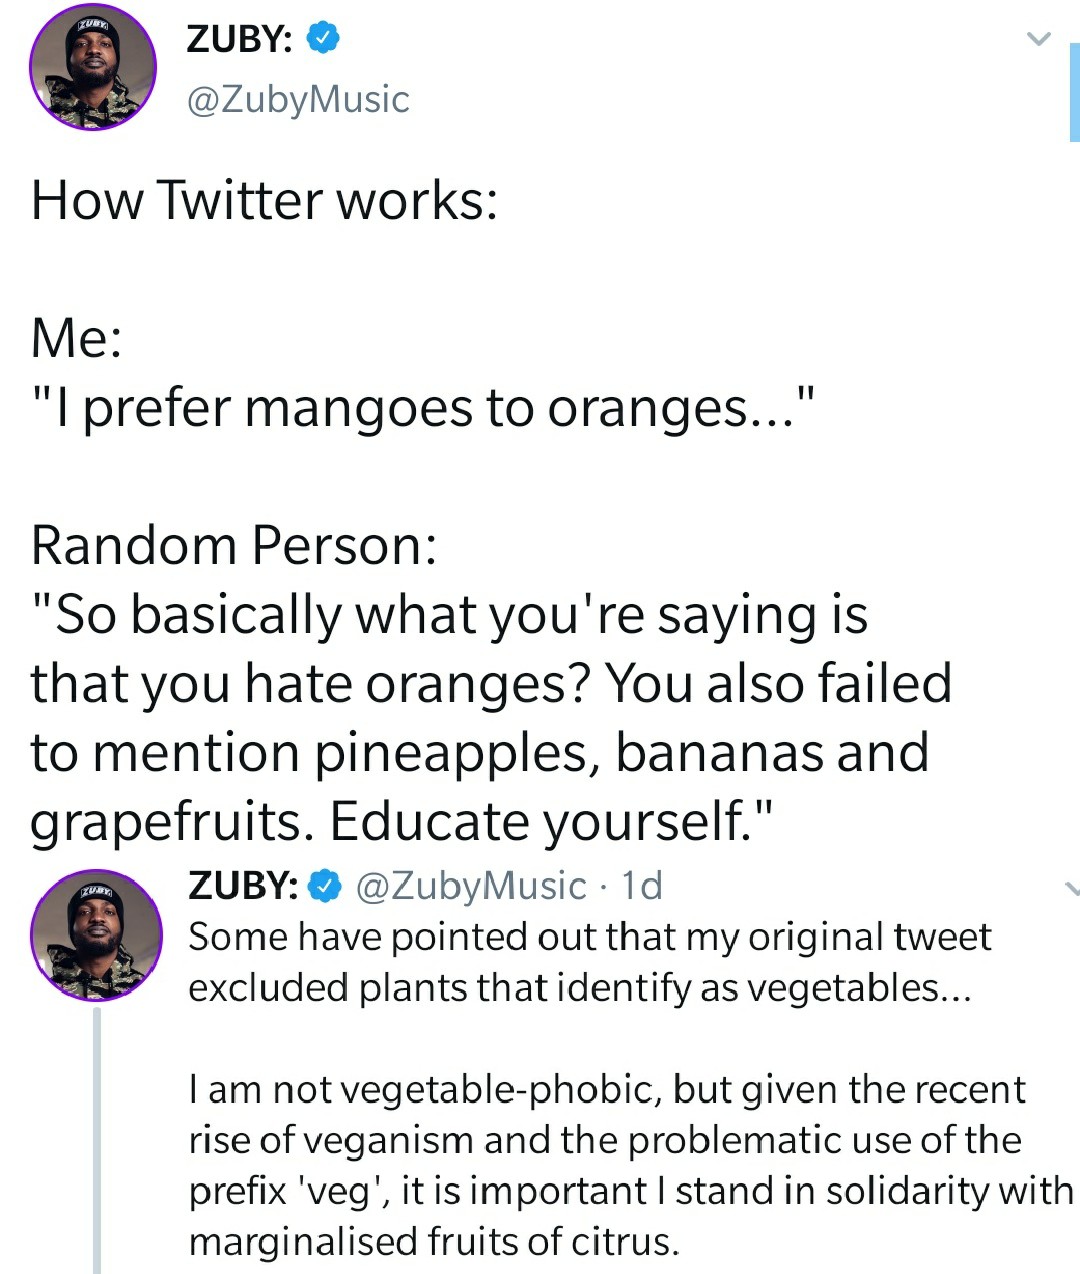 Zuby How Twitter works Me "I prefer mangoes to oranges..." Random Person "So basically what you're saying is that you hate oranges? You also failed to mention pineapples, bananas and grapefruits. Educate yourself." Zuby 1d Some have pointed out that my…